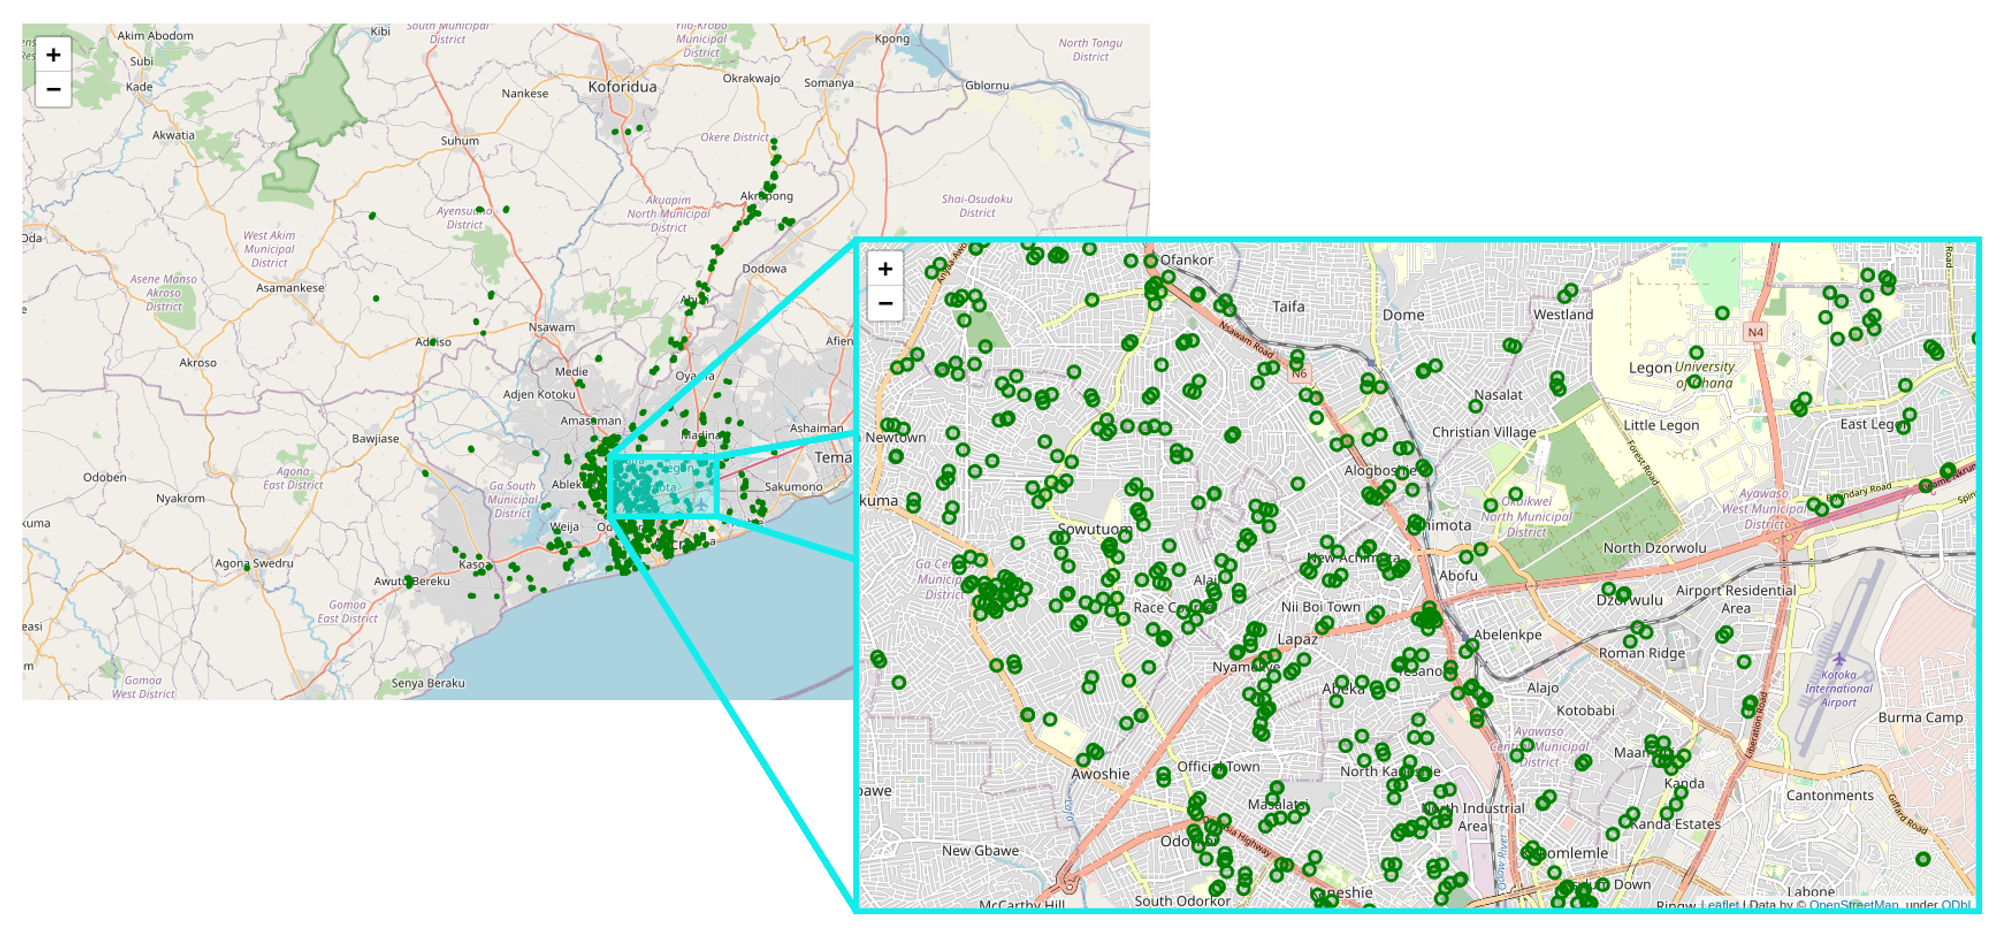 Figure 5. This is our deployment in the Greater Accra Region, with a zoom on the region around Koforidua Airport and the University of Ghana. At the time of writing, we have sensors installed in 1,258 homes and businesses across Accra, at 441 sites (i.e. distribution transformers).